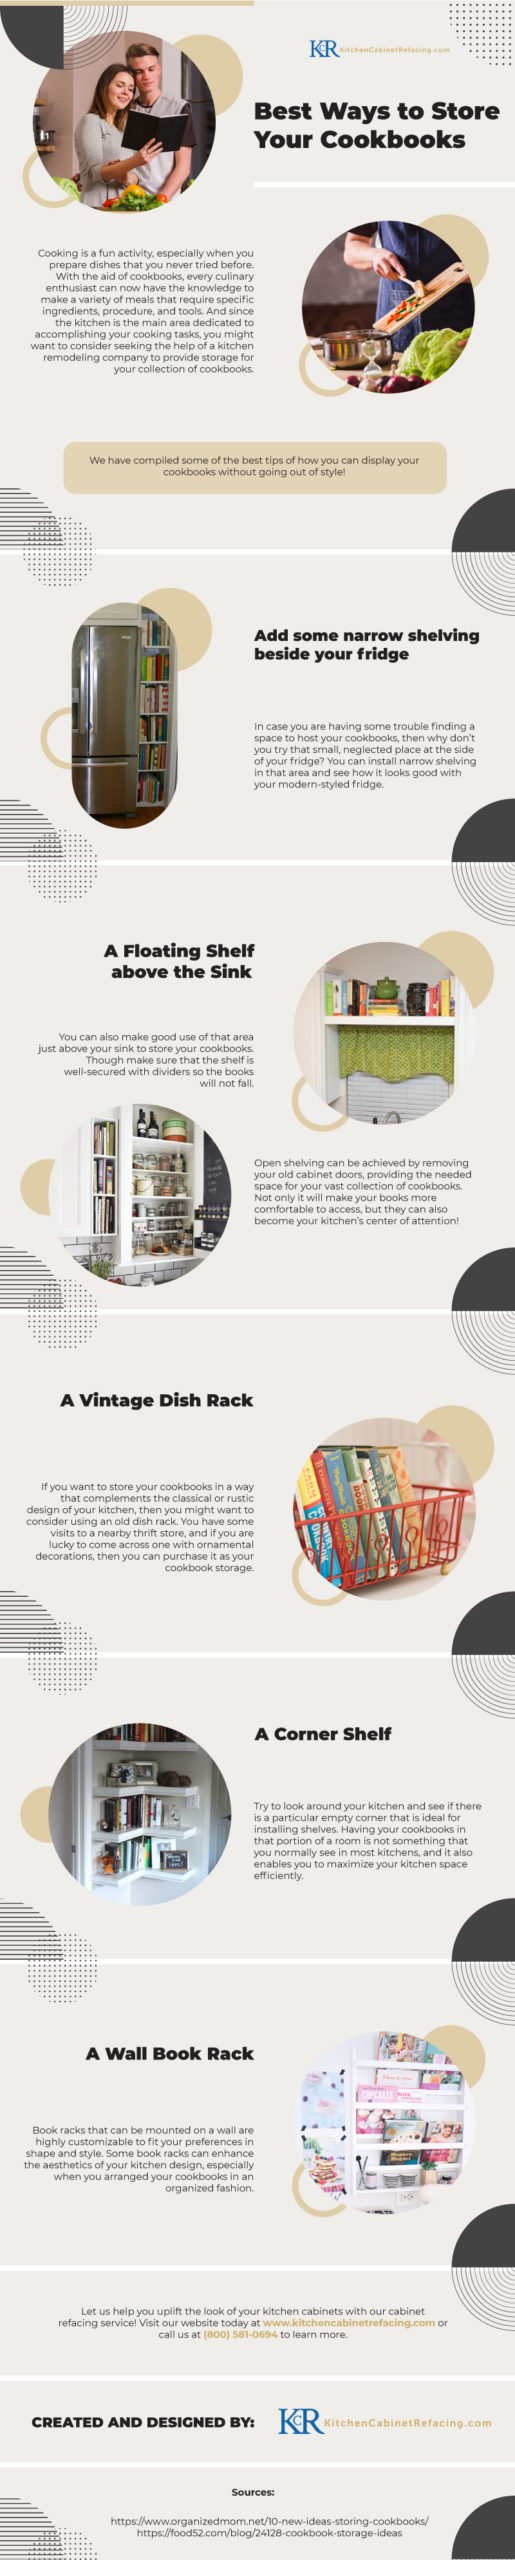 Best Ways to Store Your Cookbooks [Infographic]